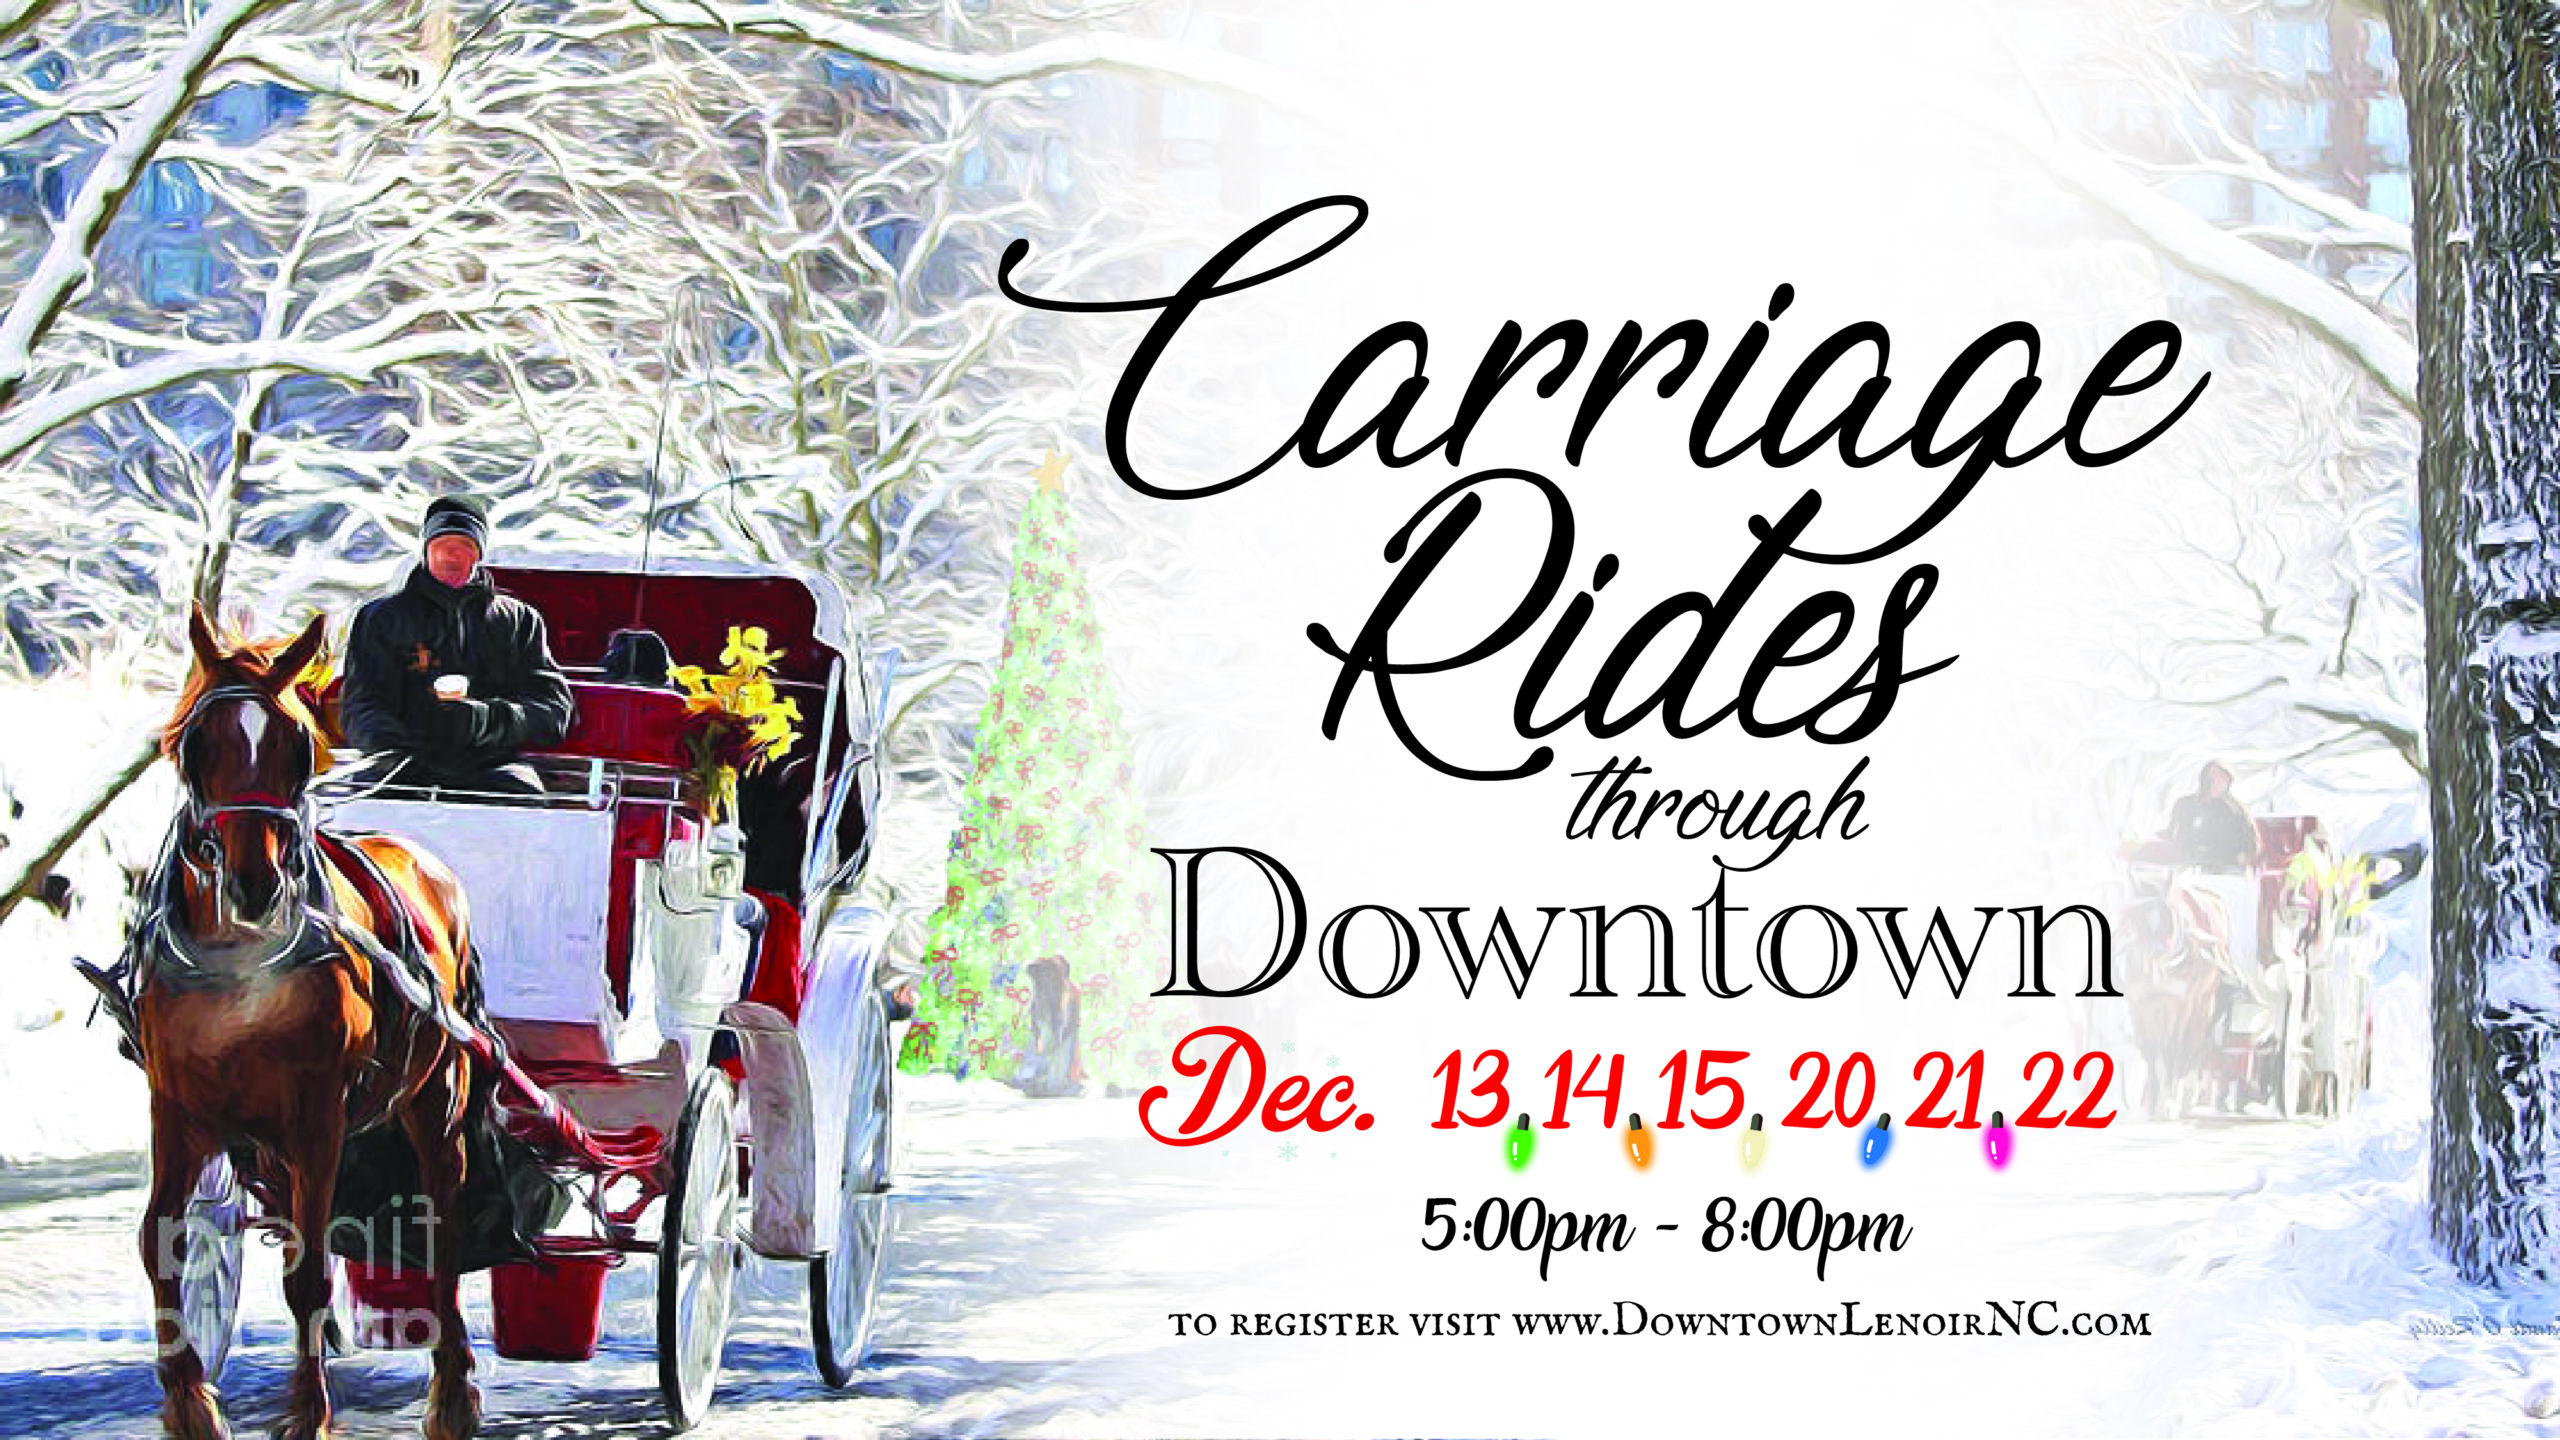 Downtown Carriage Rides